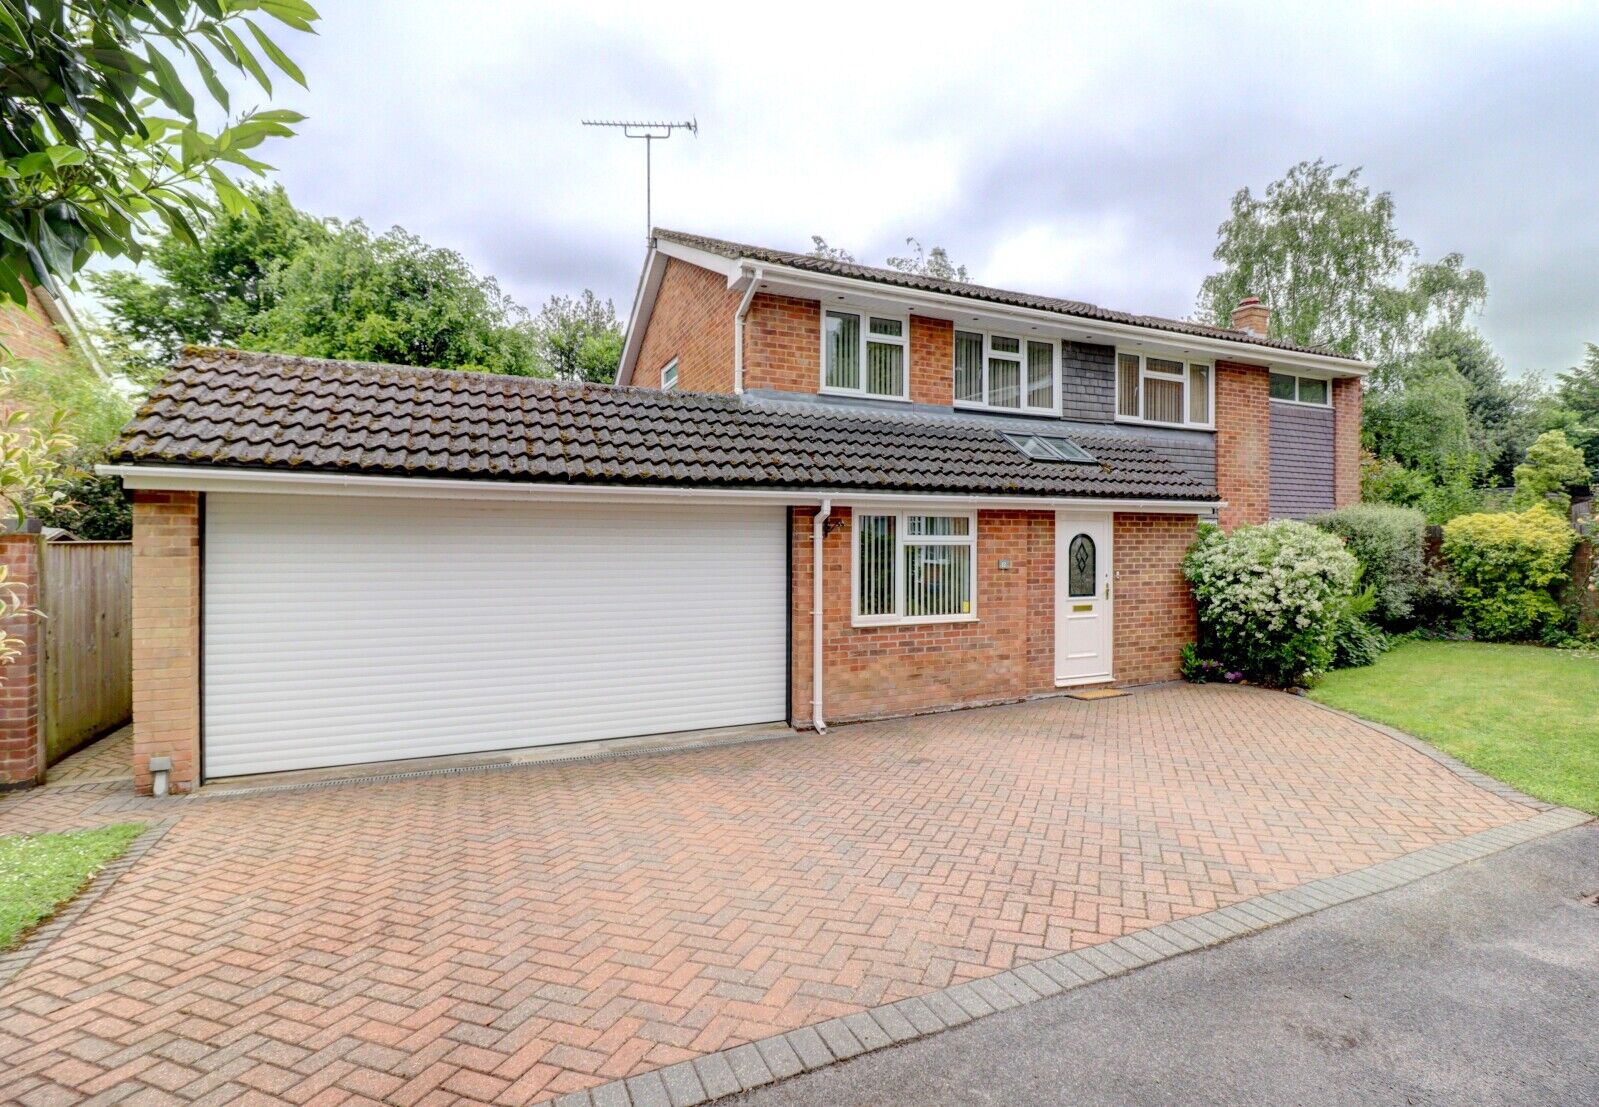 4 bedroom detached house for sale The Larches, Holmer Green, HP15, main image